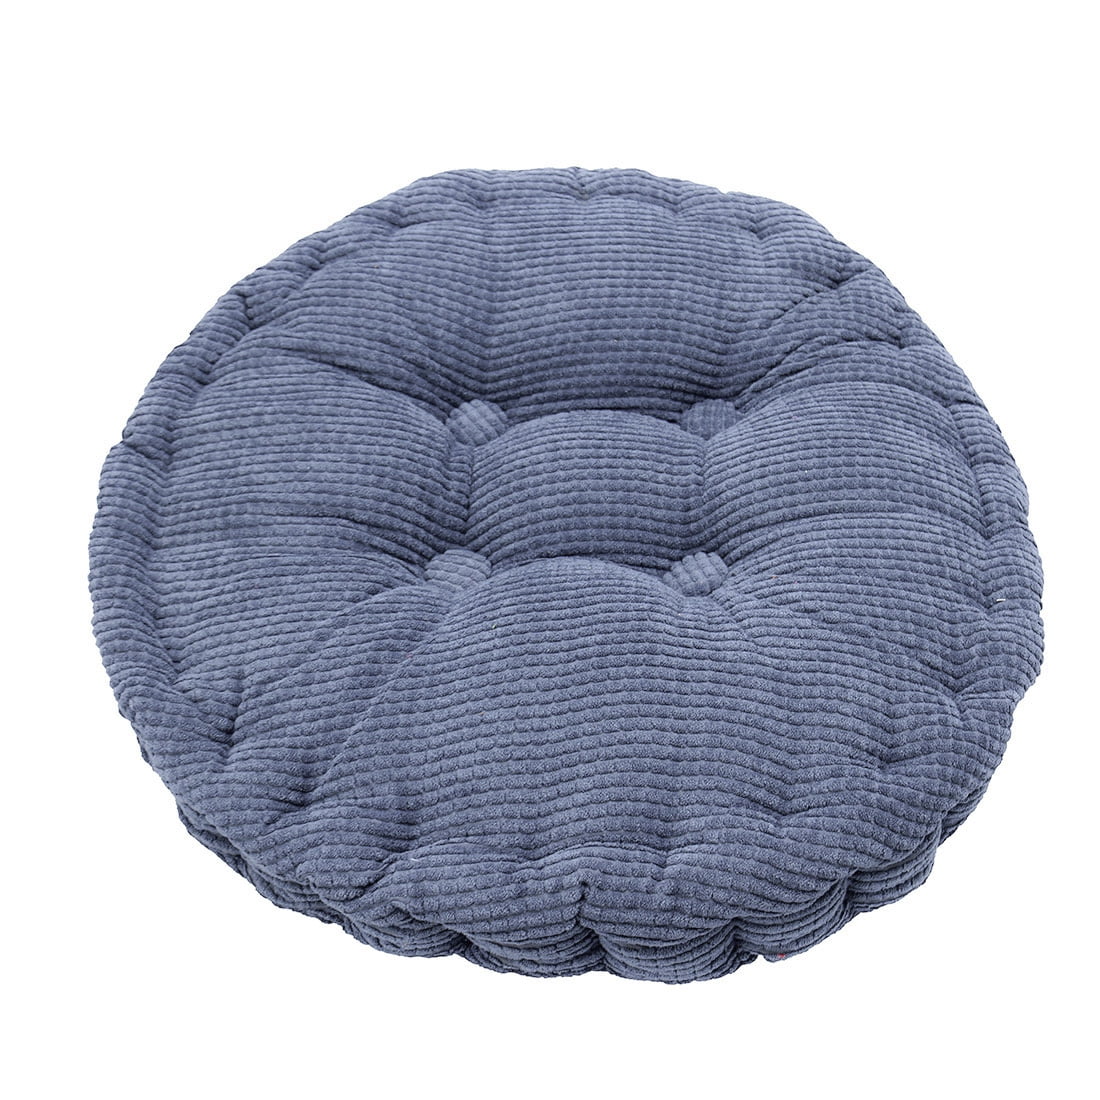 Details about   19" Thick Corduroy Cushion Pad Seat Chair Patio Mat Car Office Round/Square 